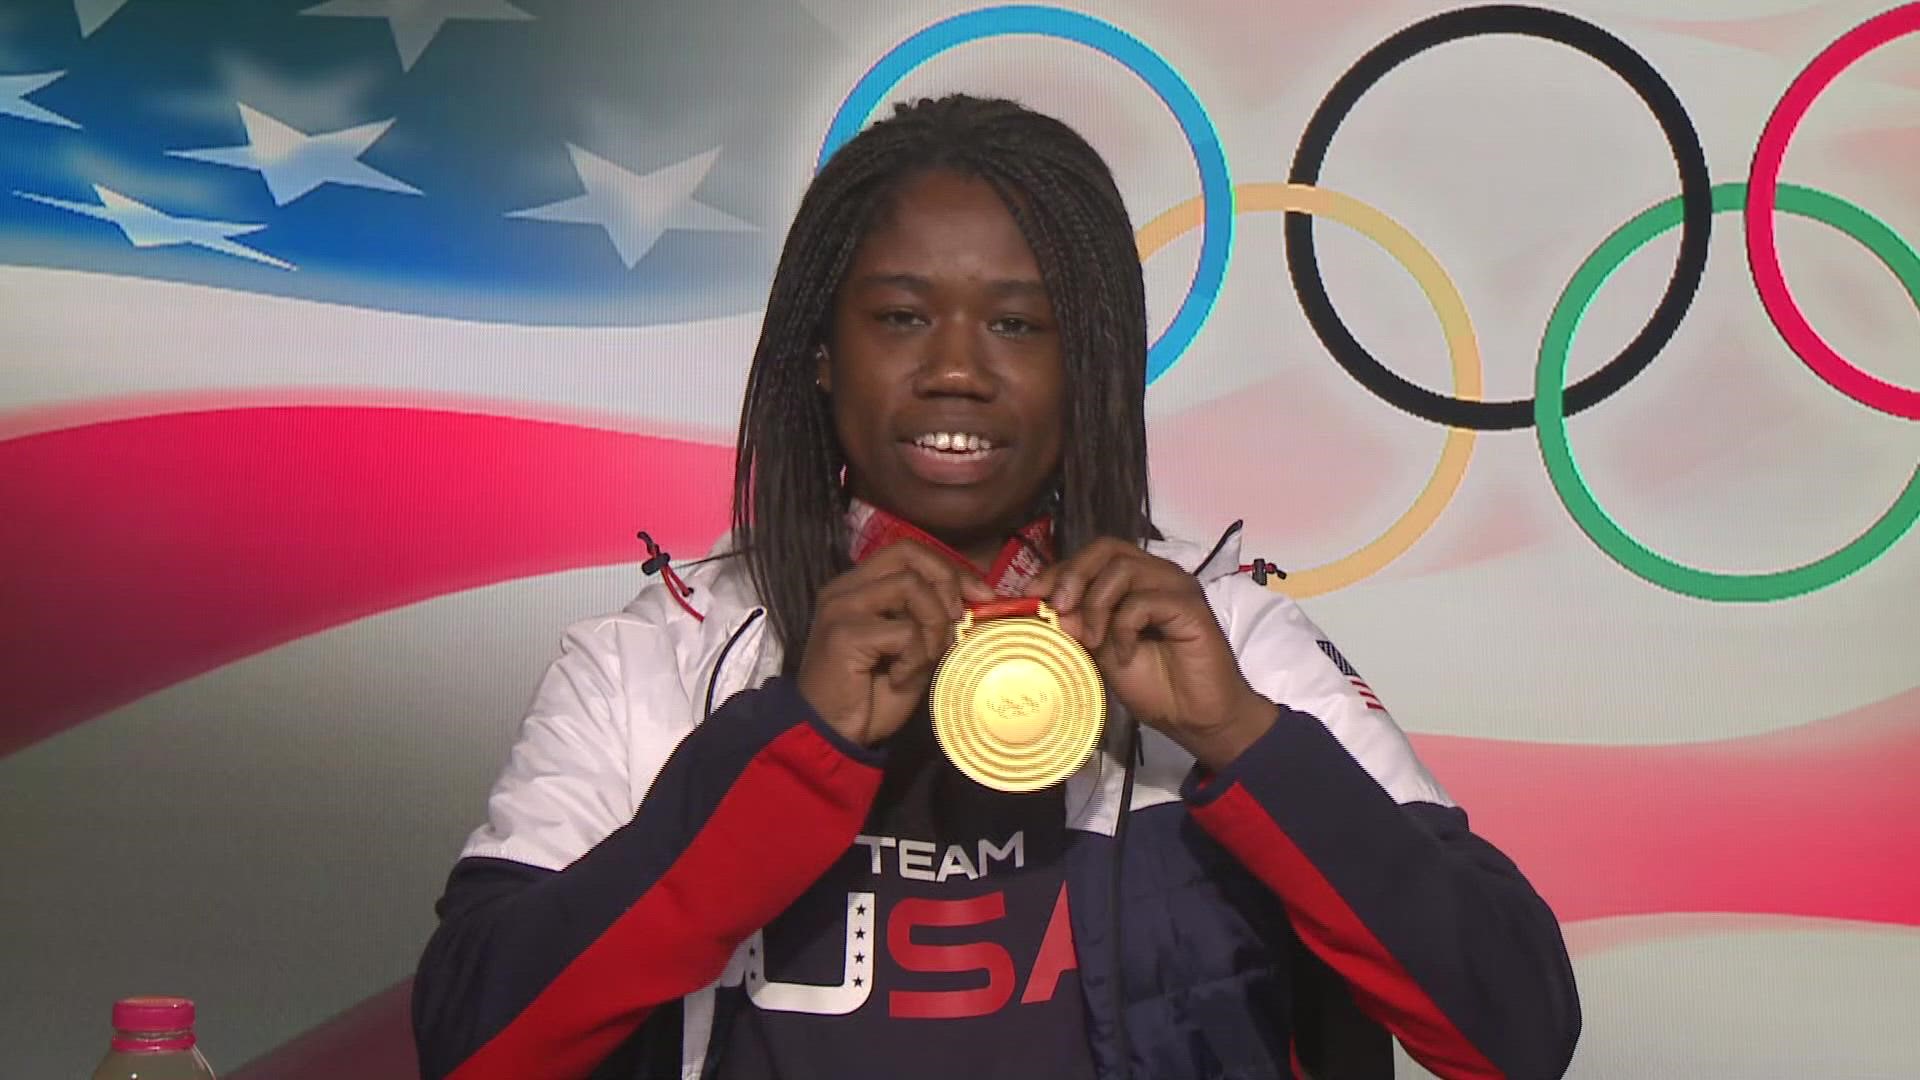 Gold medal winner Erin Jackson is back in the United States after her speed skating victory makes history for Black women